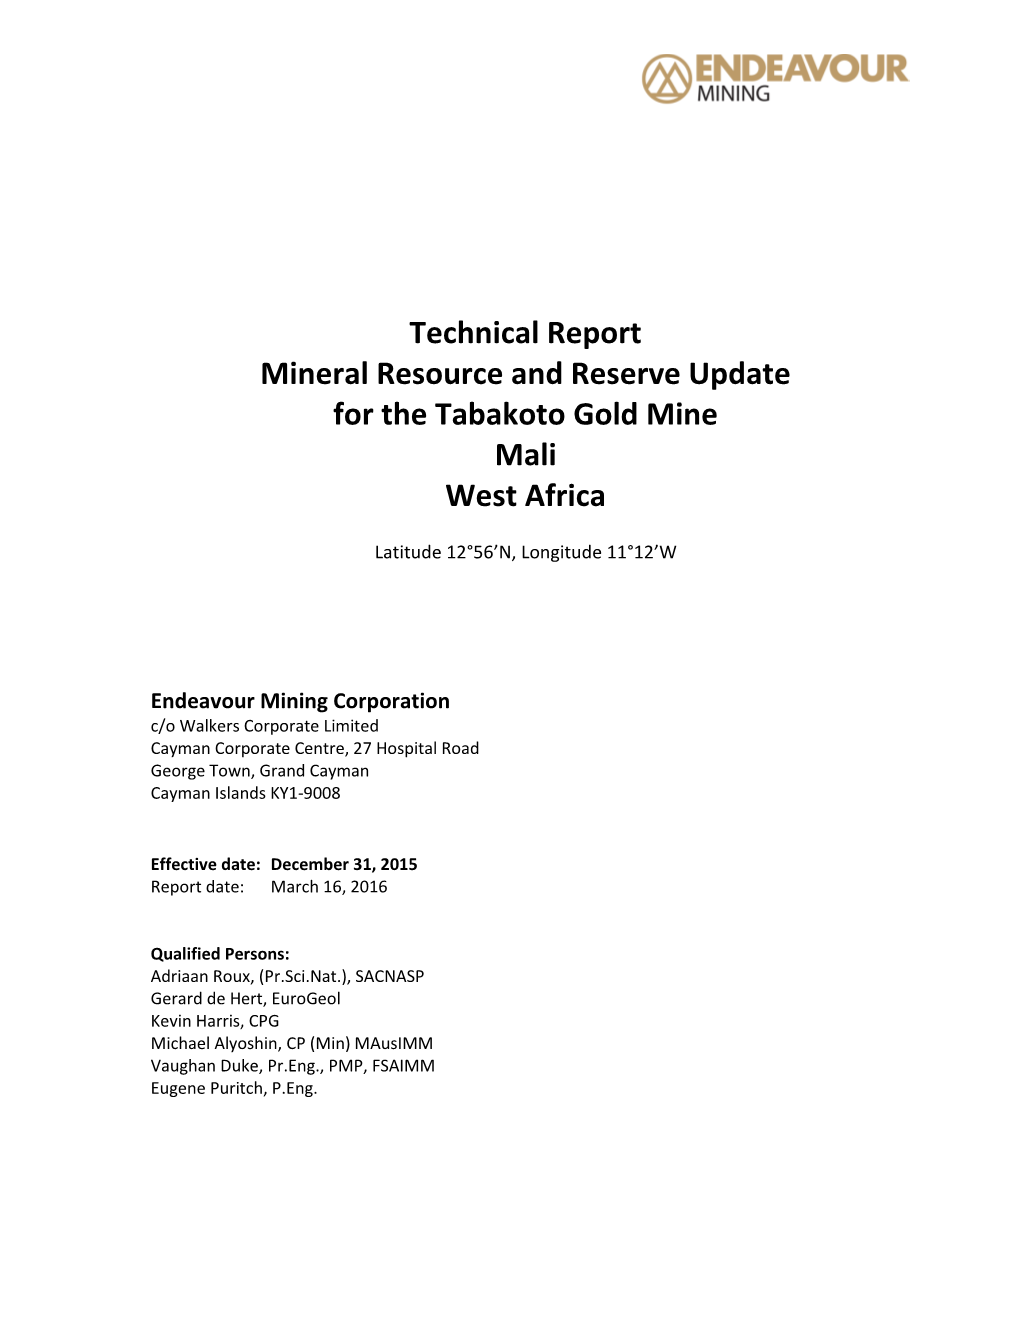 Technical Report Mineral Resource and Reserve Update for the Tabakoto Gold Mine Mali West Africa